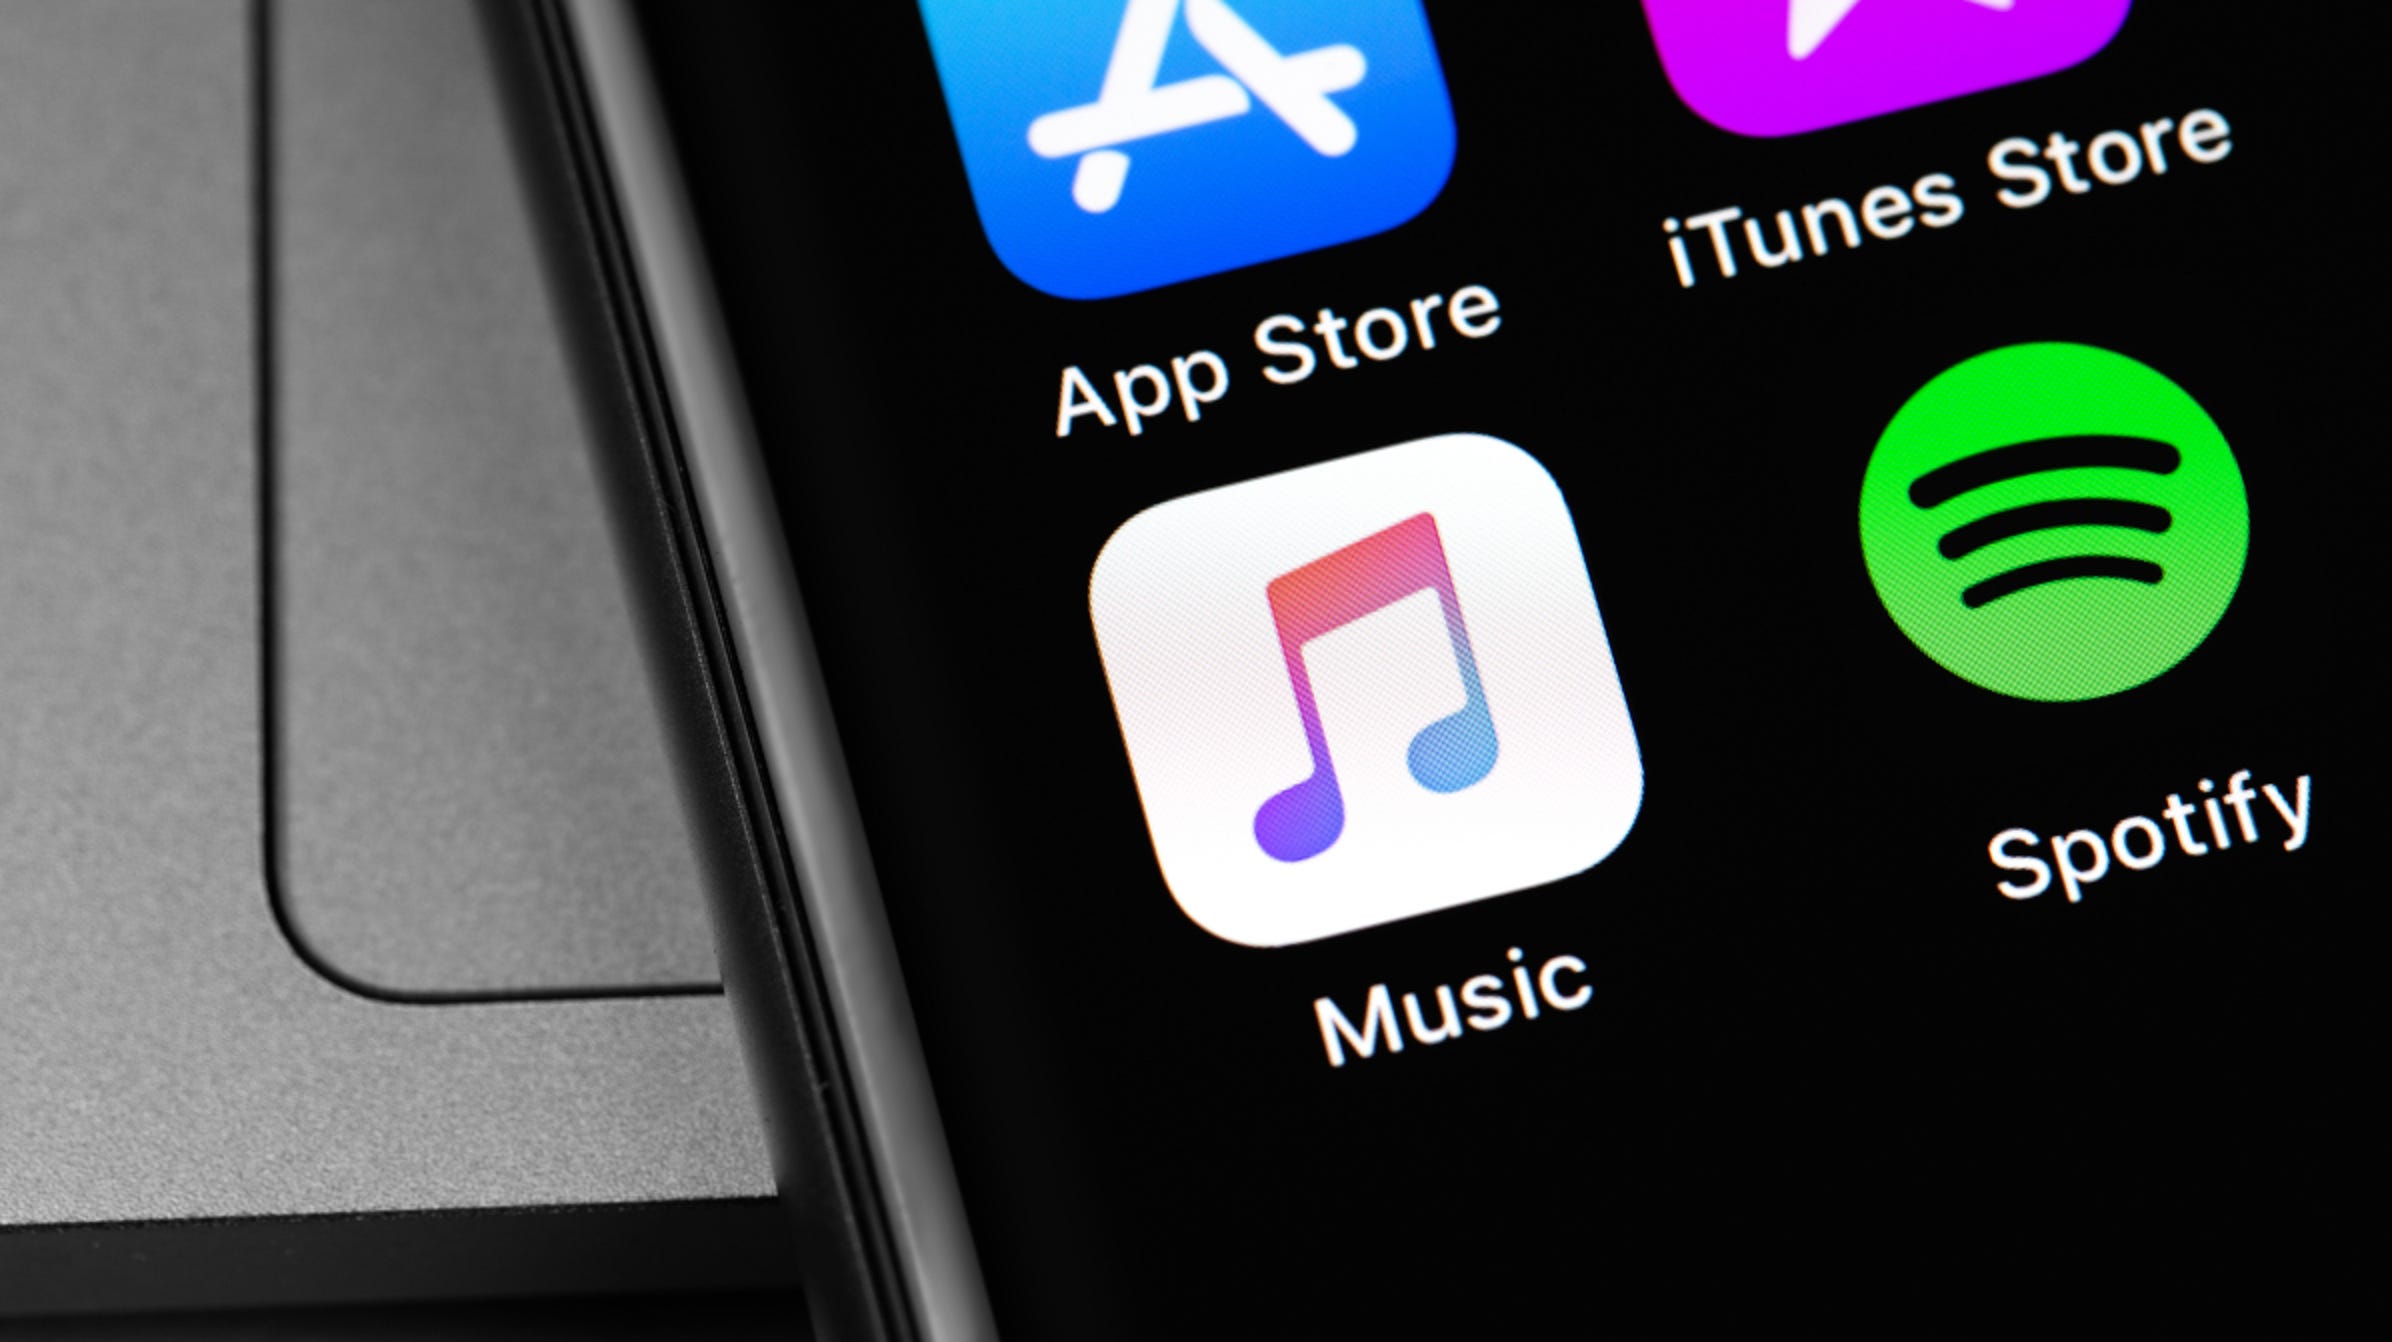 What Is Sound Check on iPhone, and How Do You Use It?